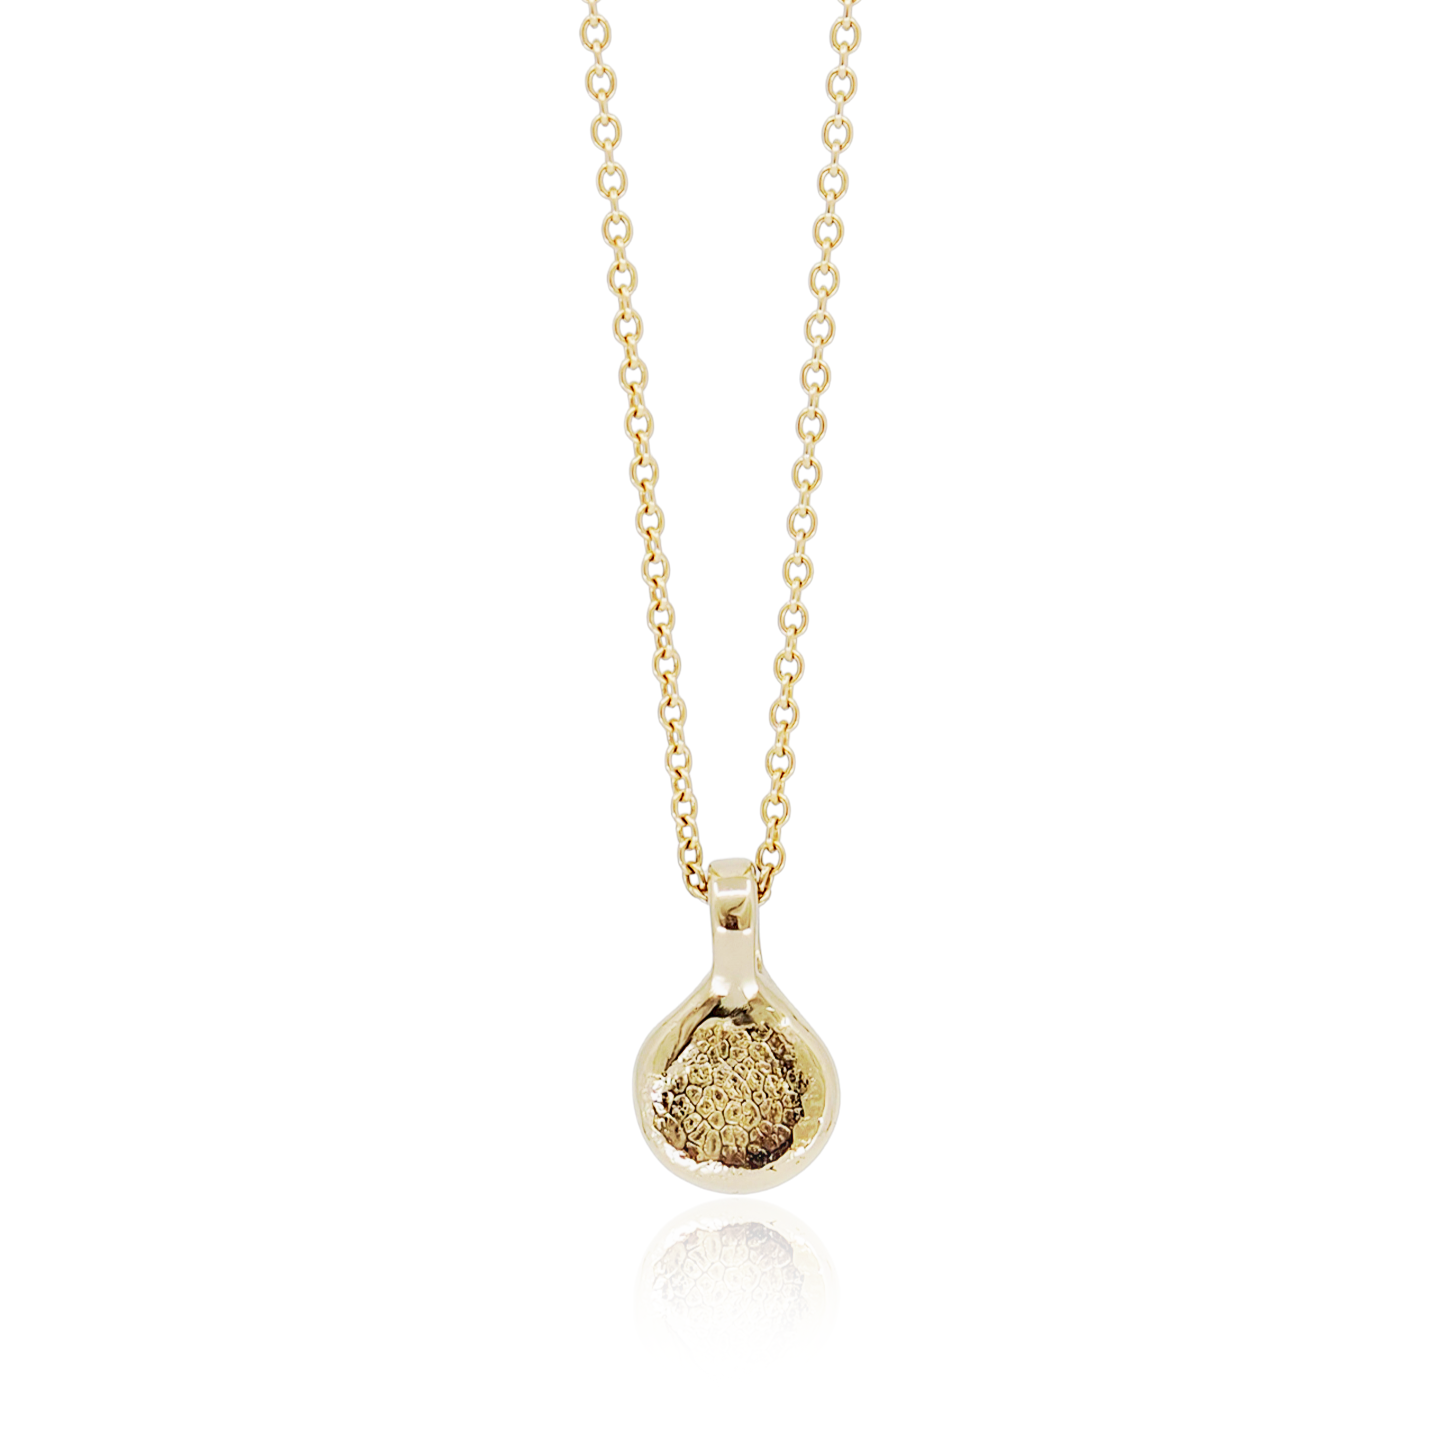 Pet Impression Necklace in Solid Gold